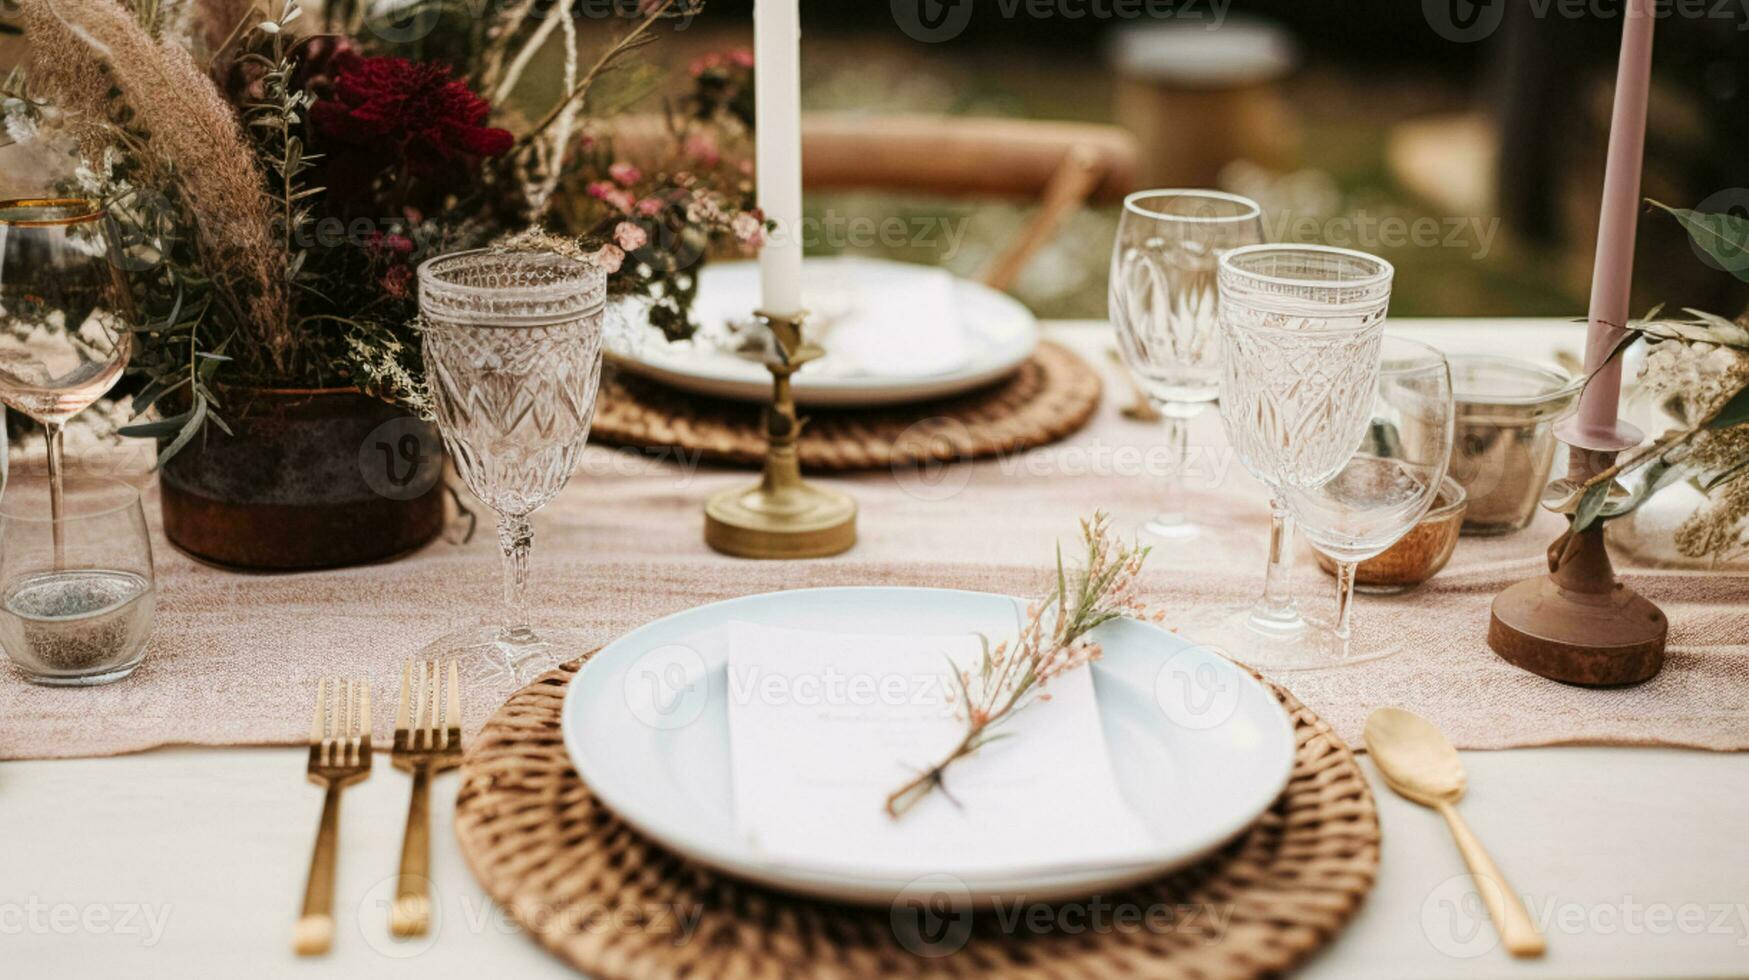 Table decor, holiday tablescape and dinner table setting in countryside garden, formal event decoration for wedding, family celebration, English country and home styling photo